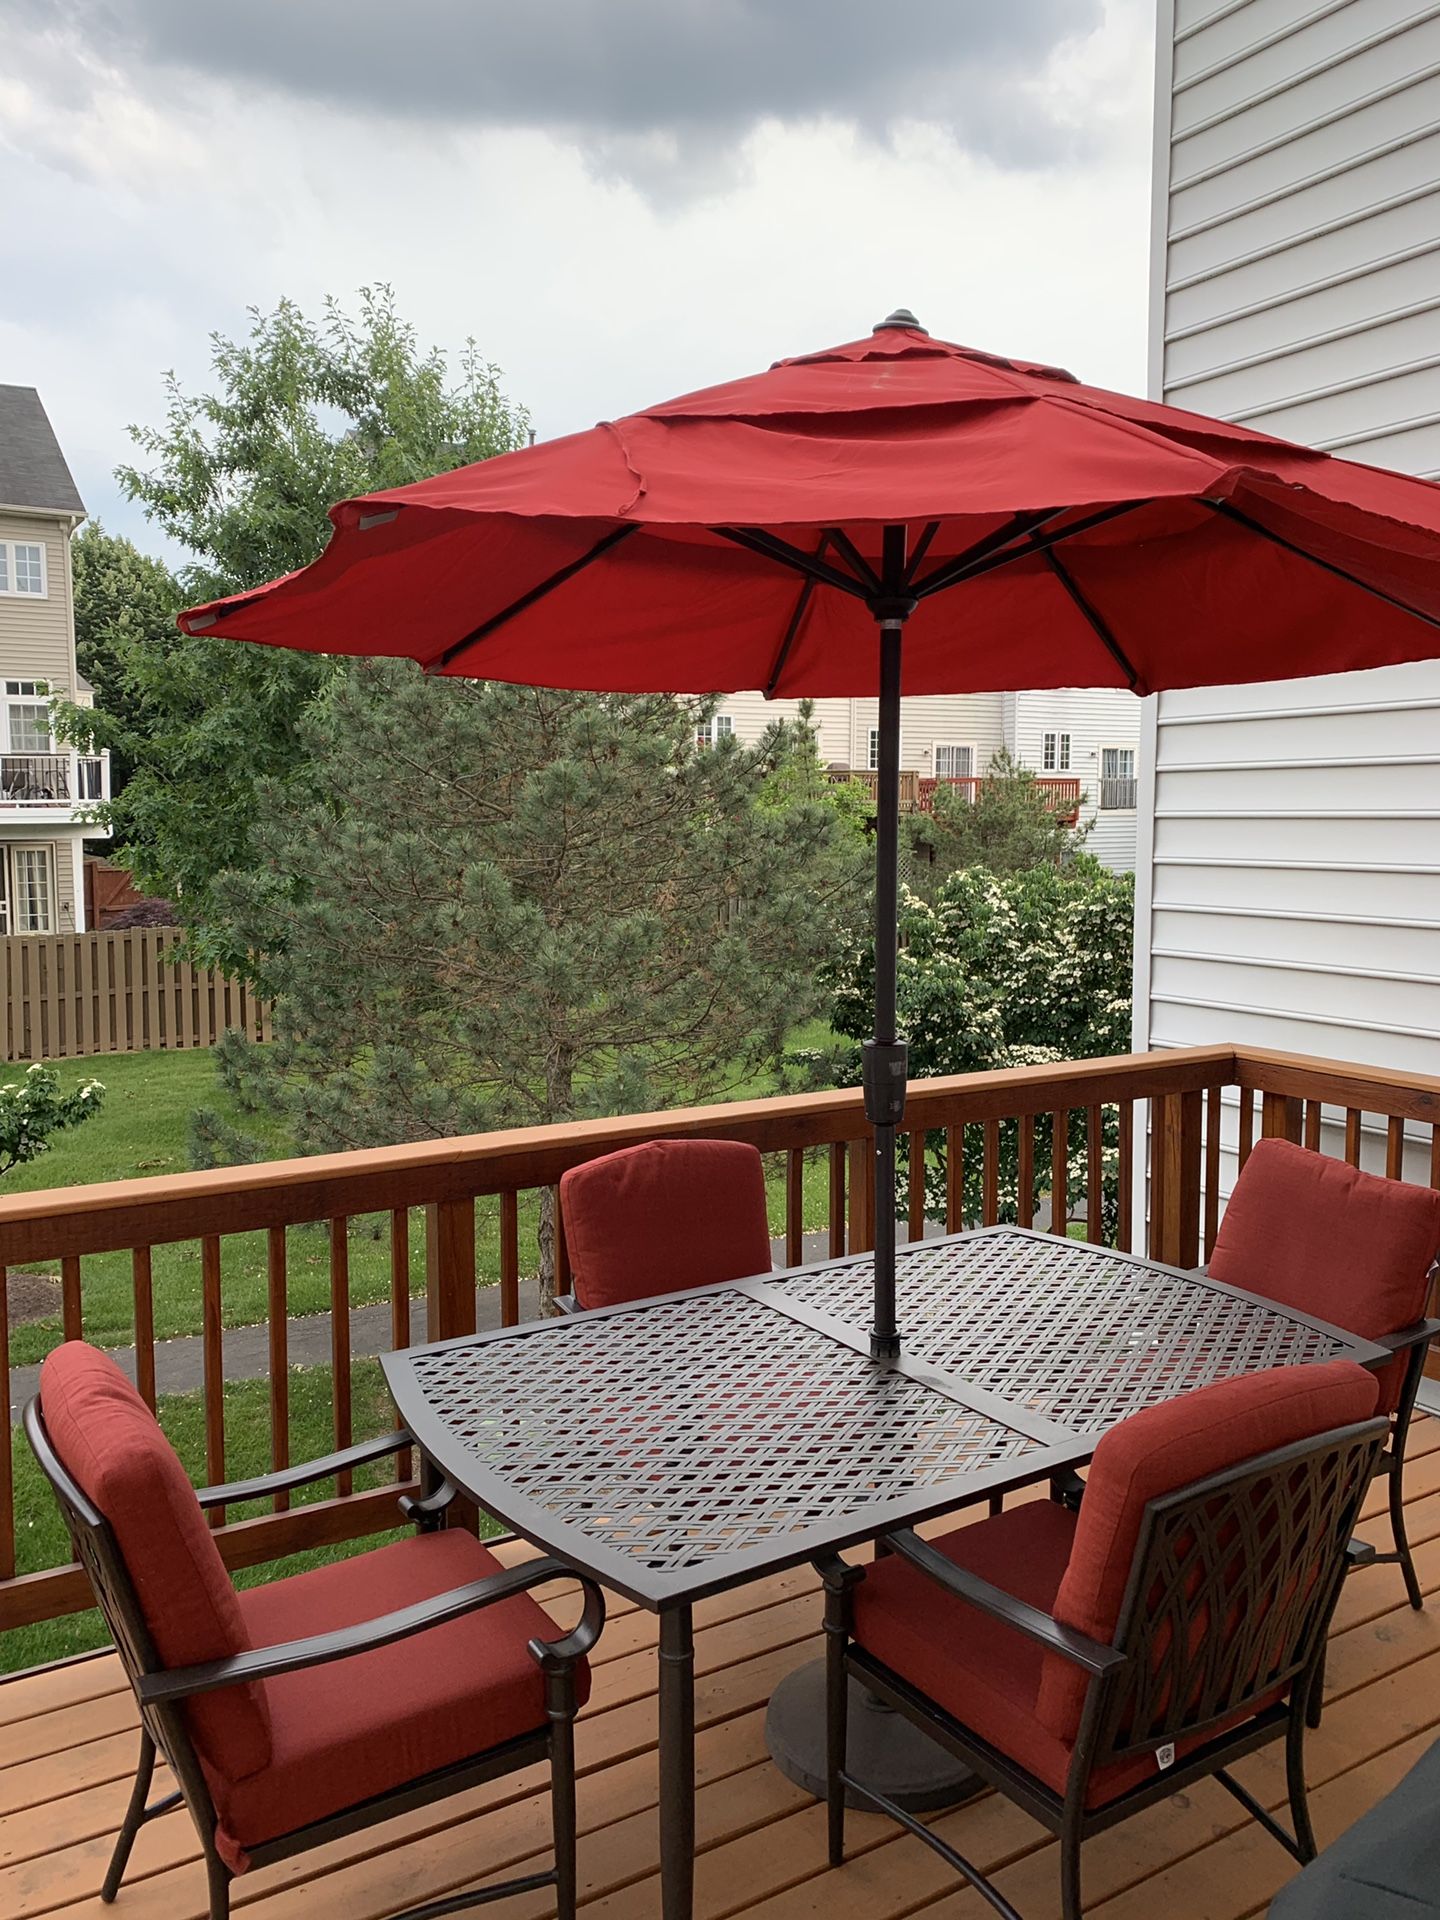 Patio furniture with 6 chairs and umbrella